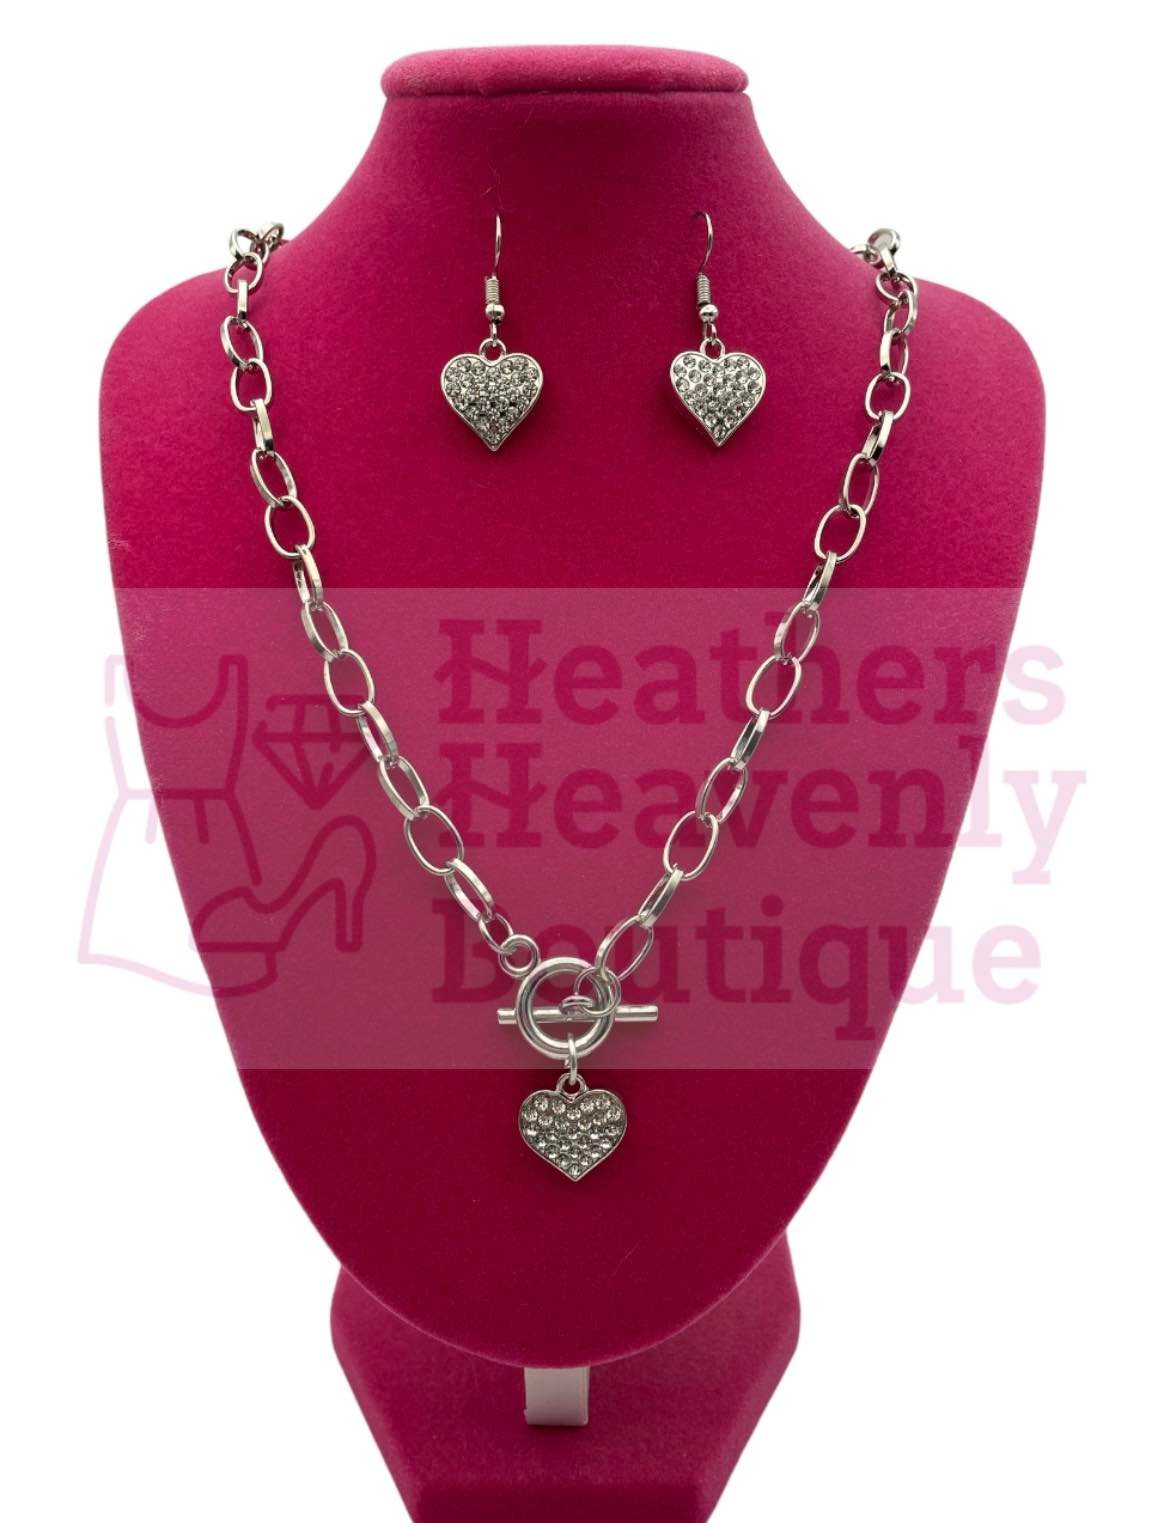 White Rhinestone Heart Necklace with Matching Earrings - Heather's Heavenly Boutique